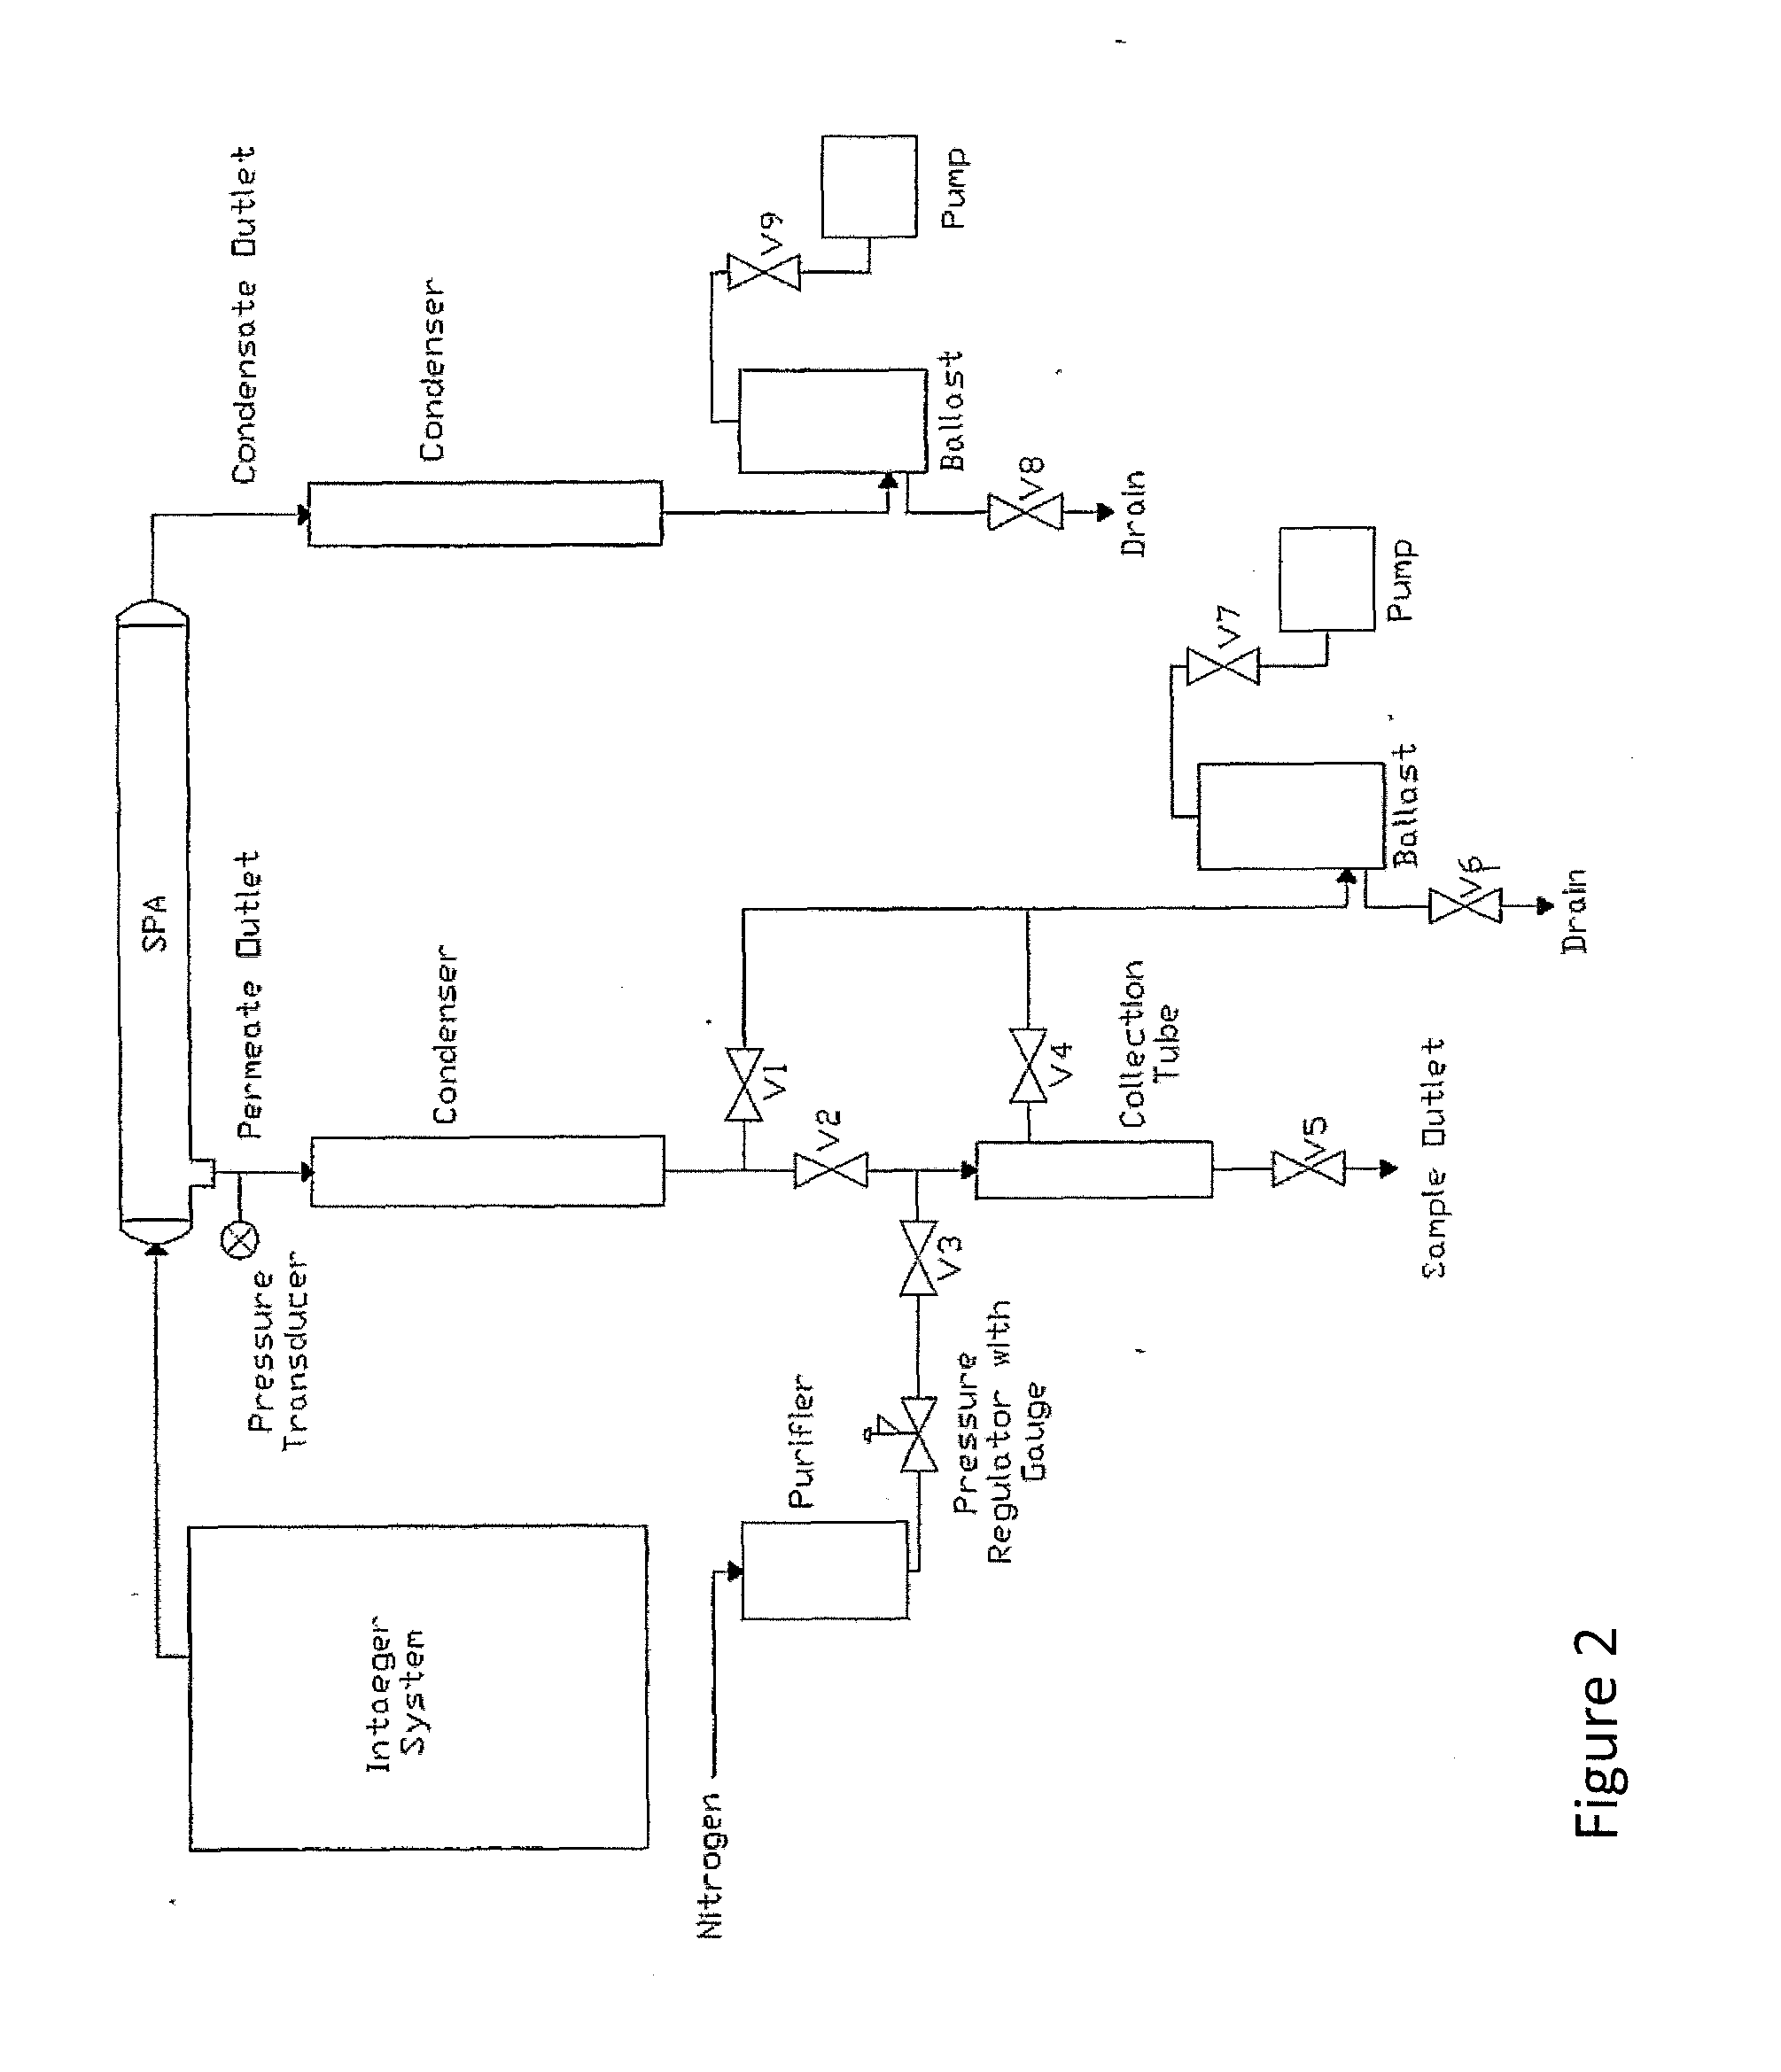 Methods and devices for producing high purity steam